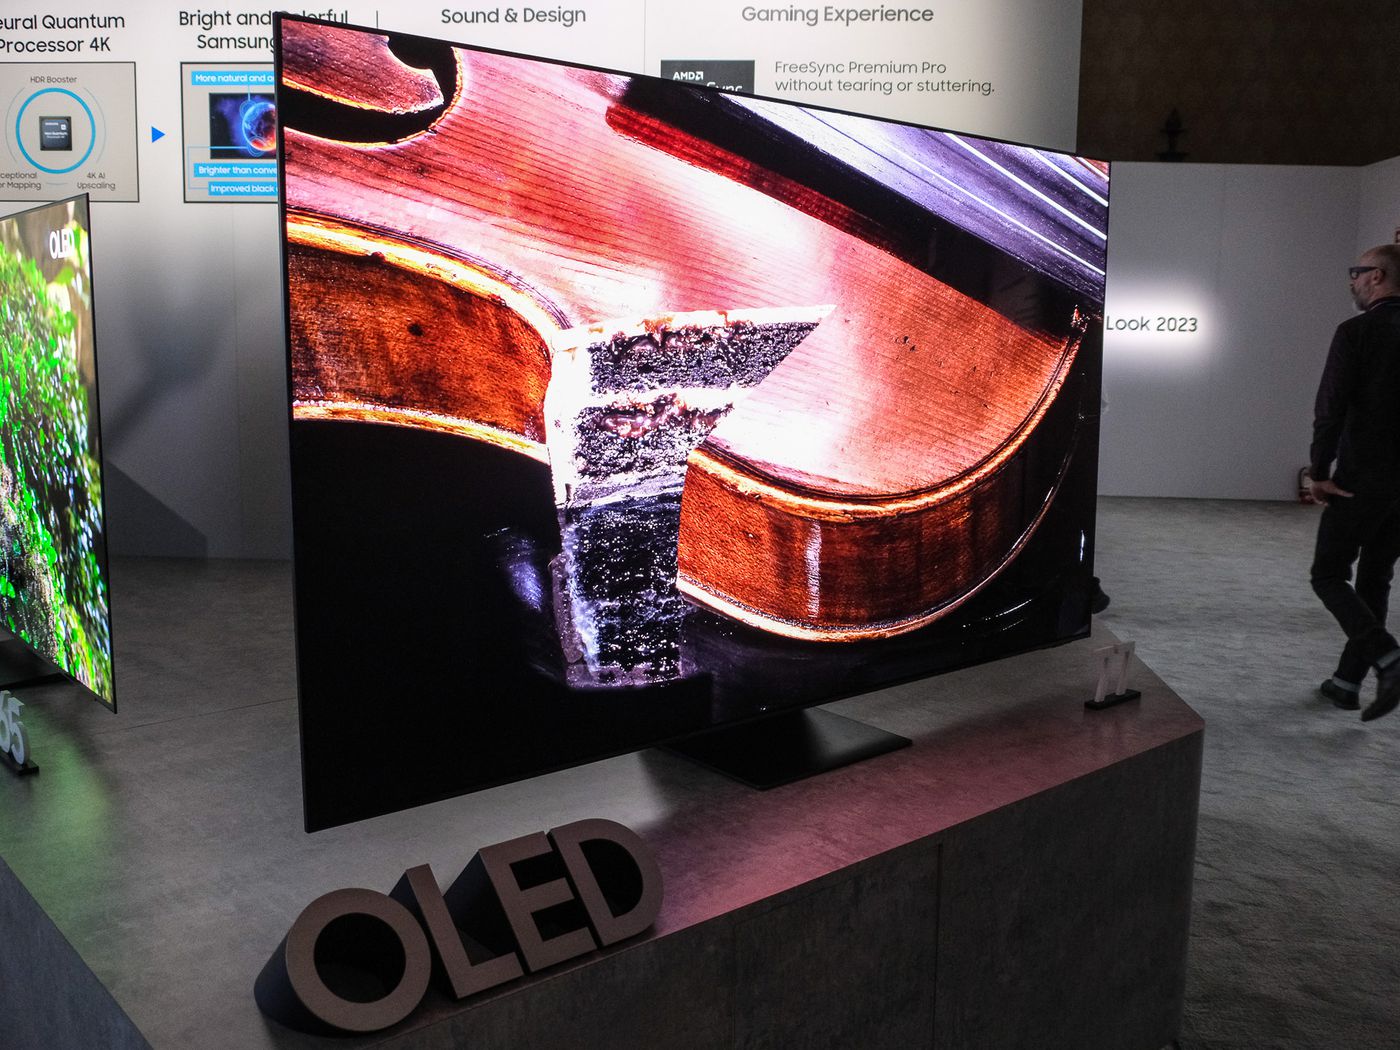 A 77" Samsung QD-OLED 4K TV with 144Hz frame rate and 2000 nits brightness goes on sale for $4500